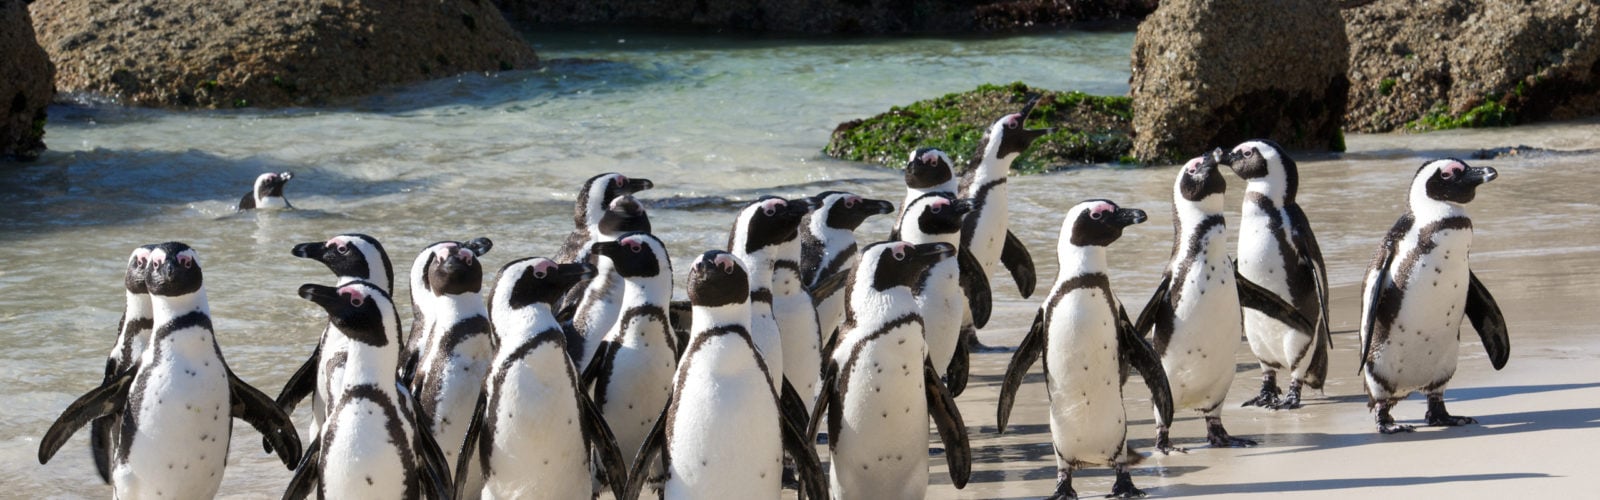 A group of penguins on Boulders Beach in Cape Town.